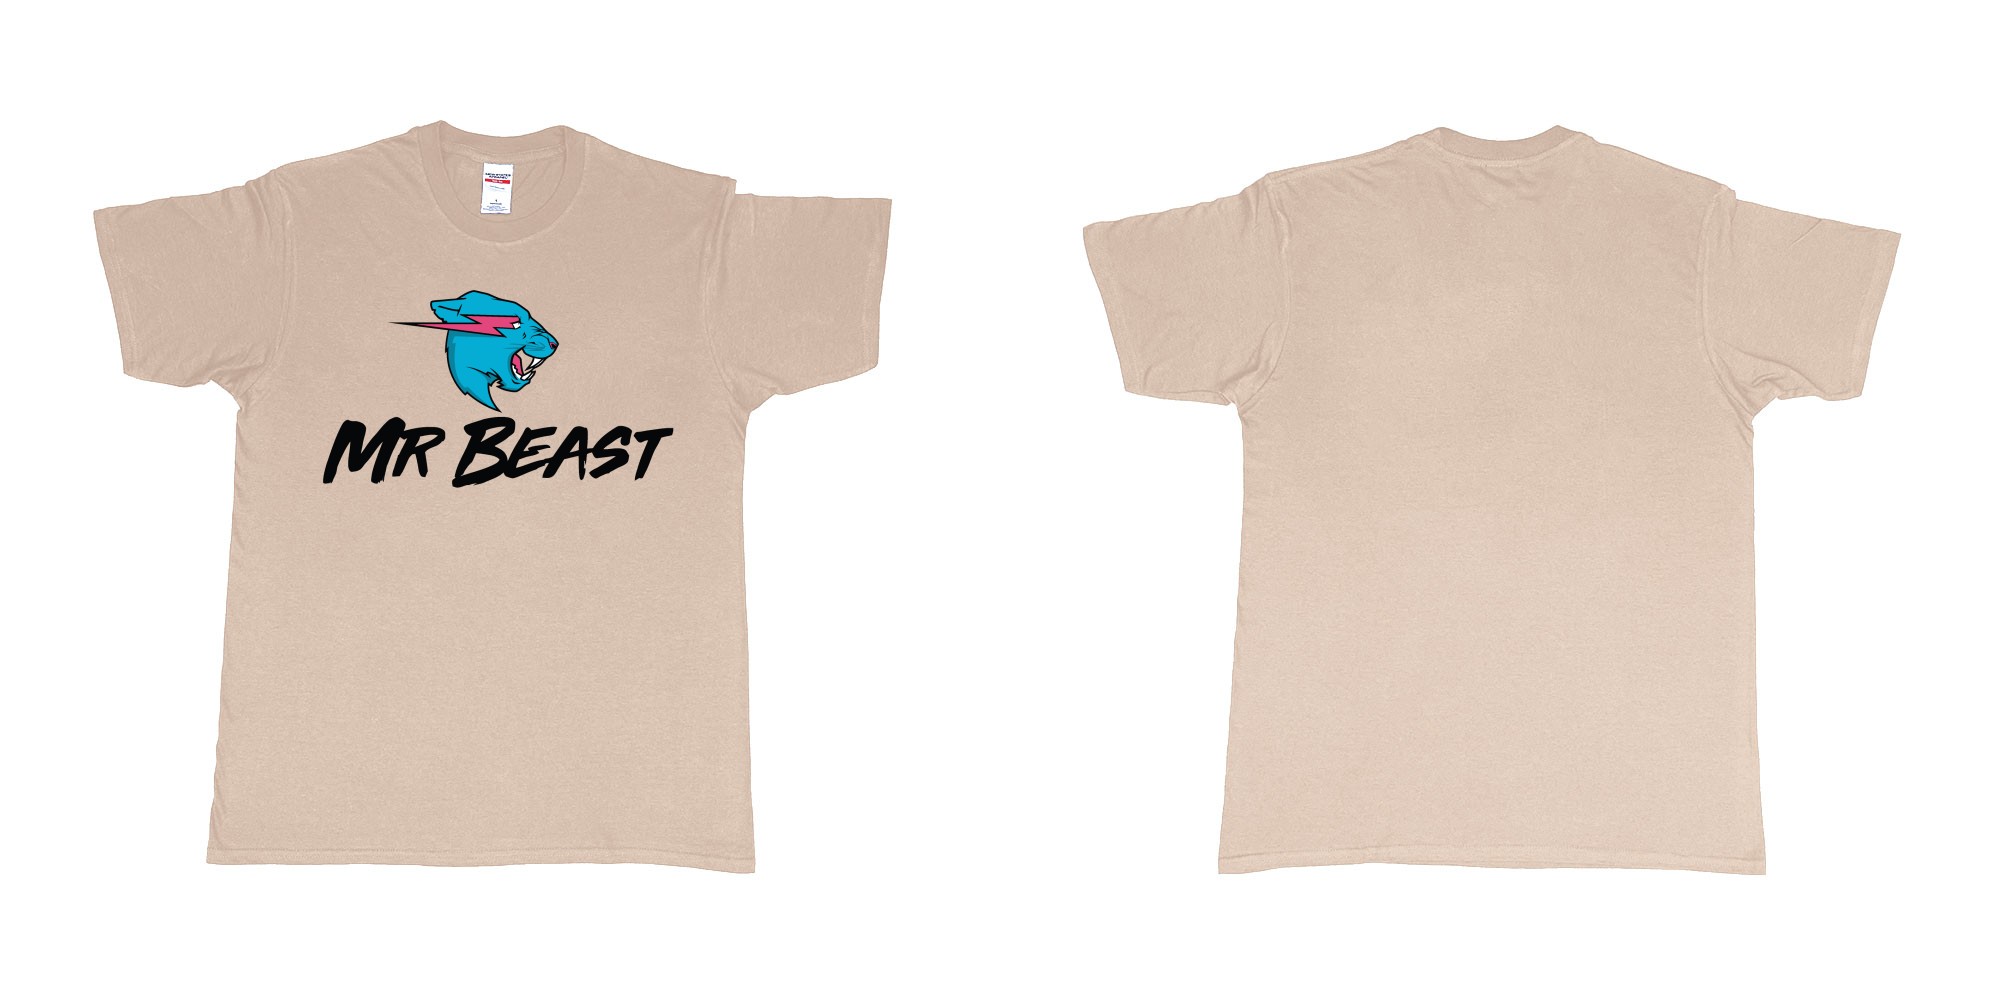 Custom tshirt design mr beast logo in fabric color sand choice your own text made in Bali by The Pirate Way